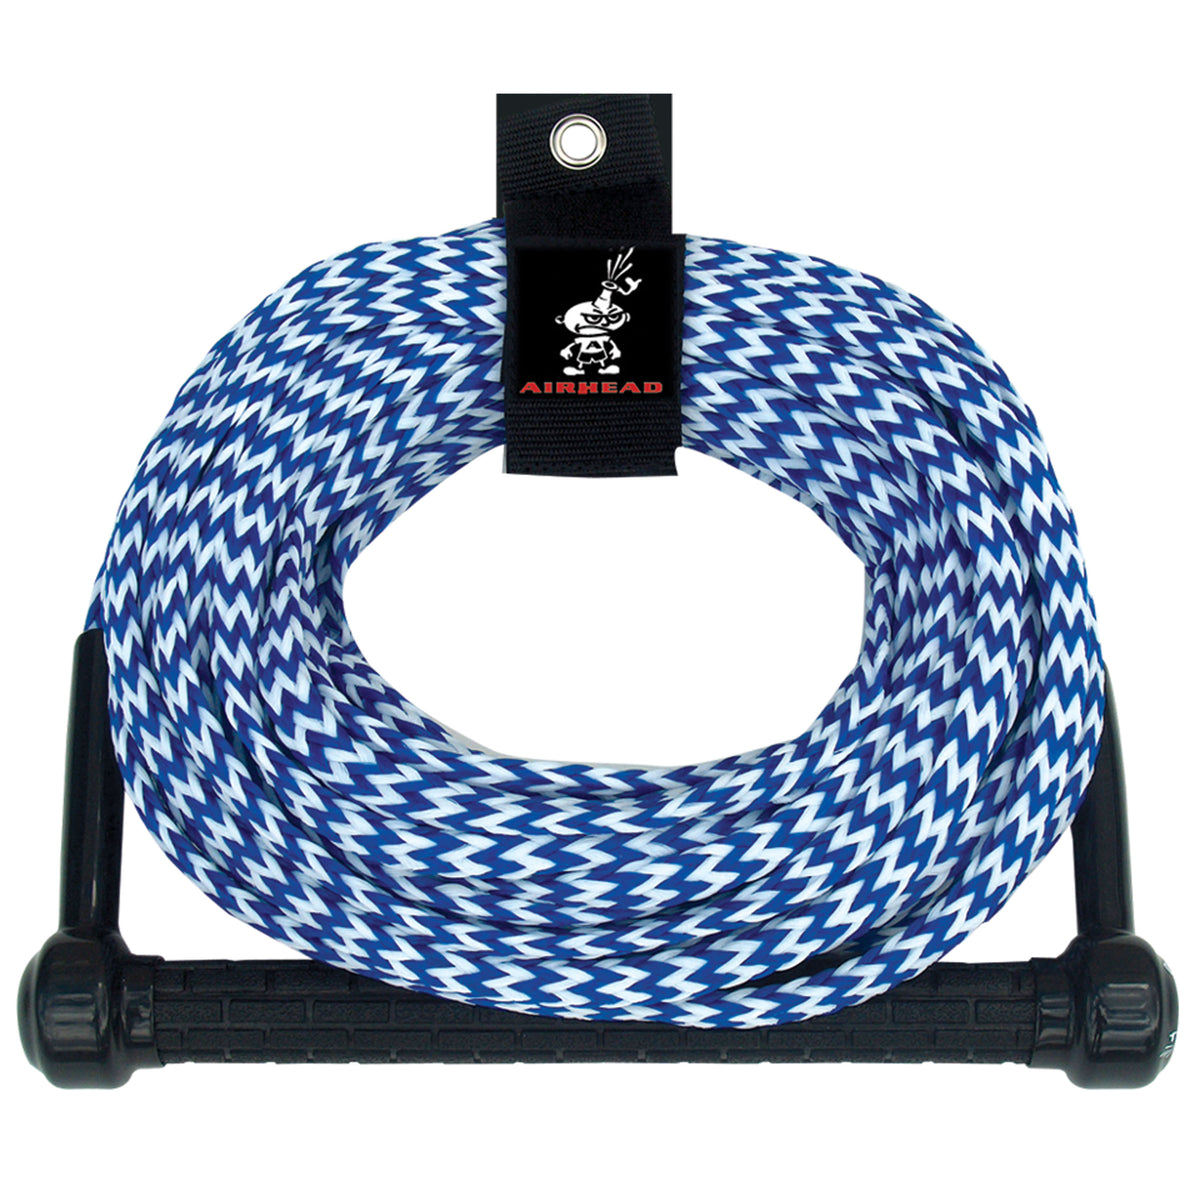 Airhead AHSR-75 1-Section Water Ski Rope with Tractor-Grip Handle - 75', Blue/White